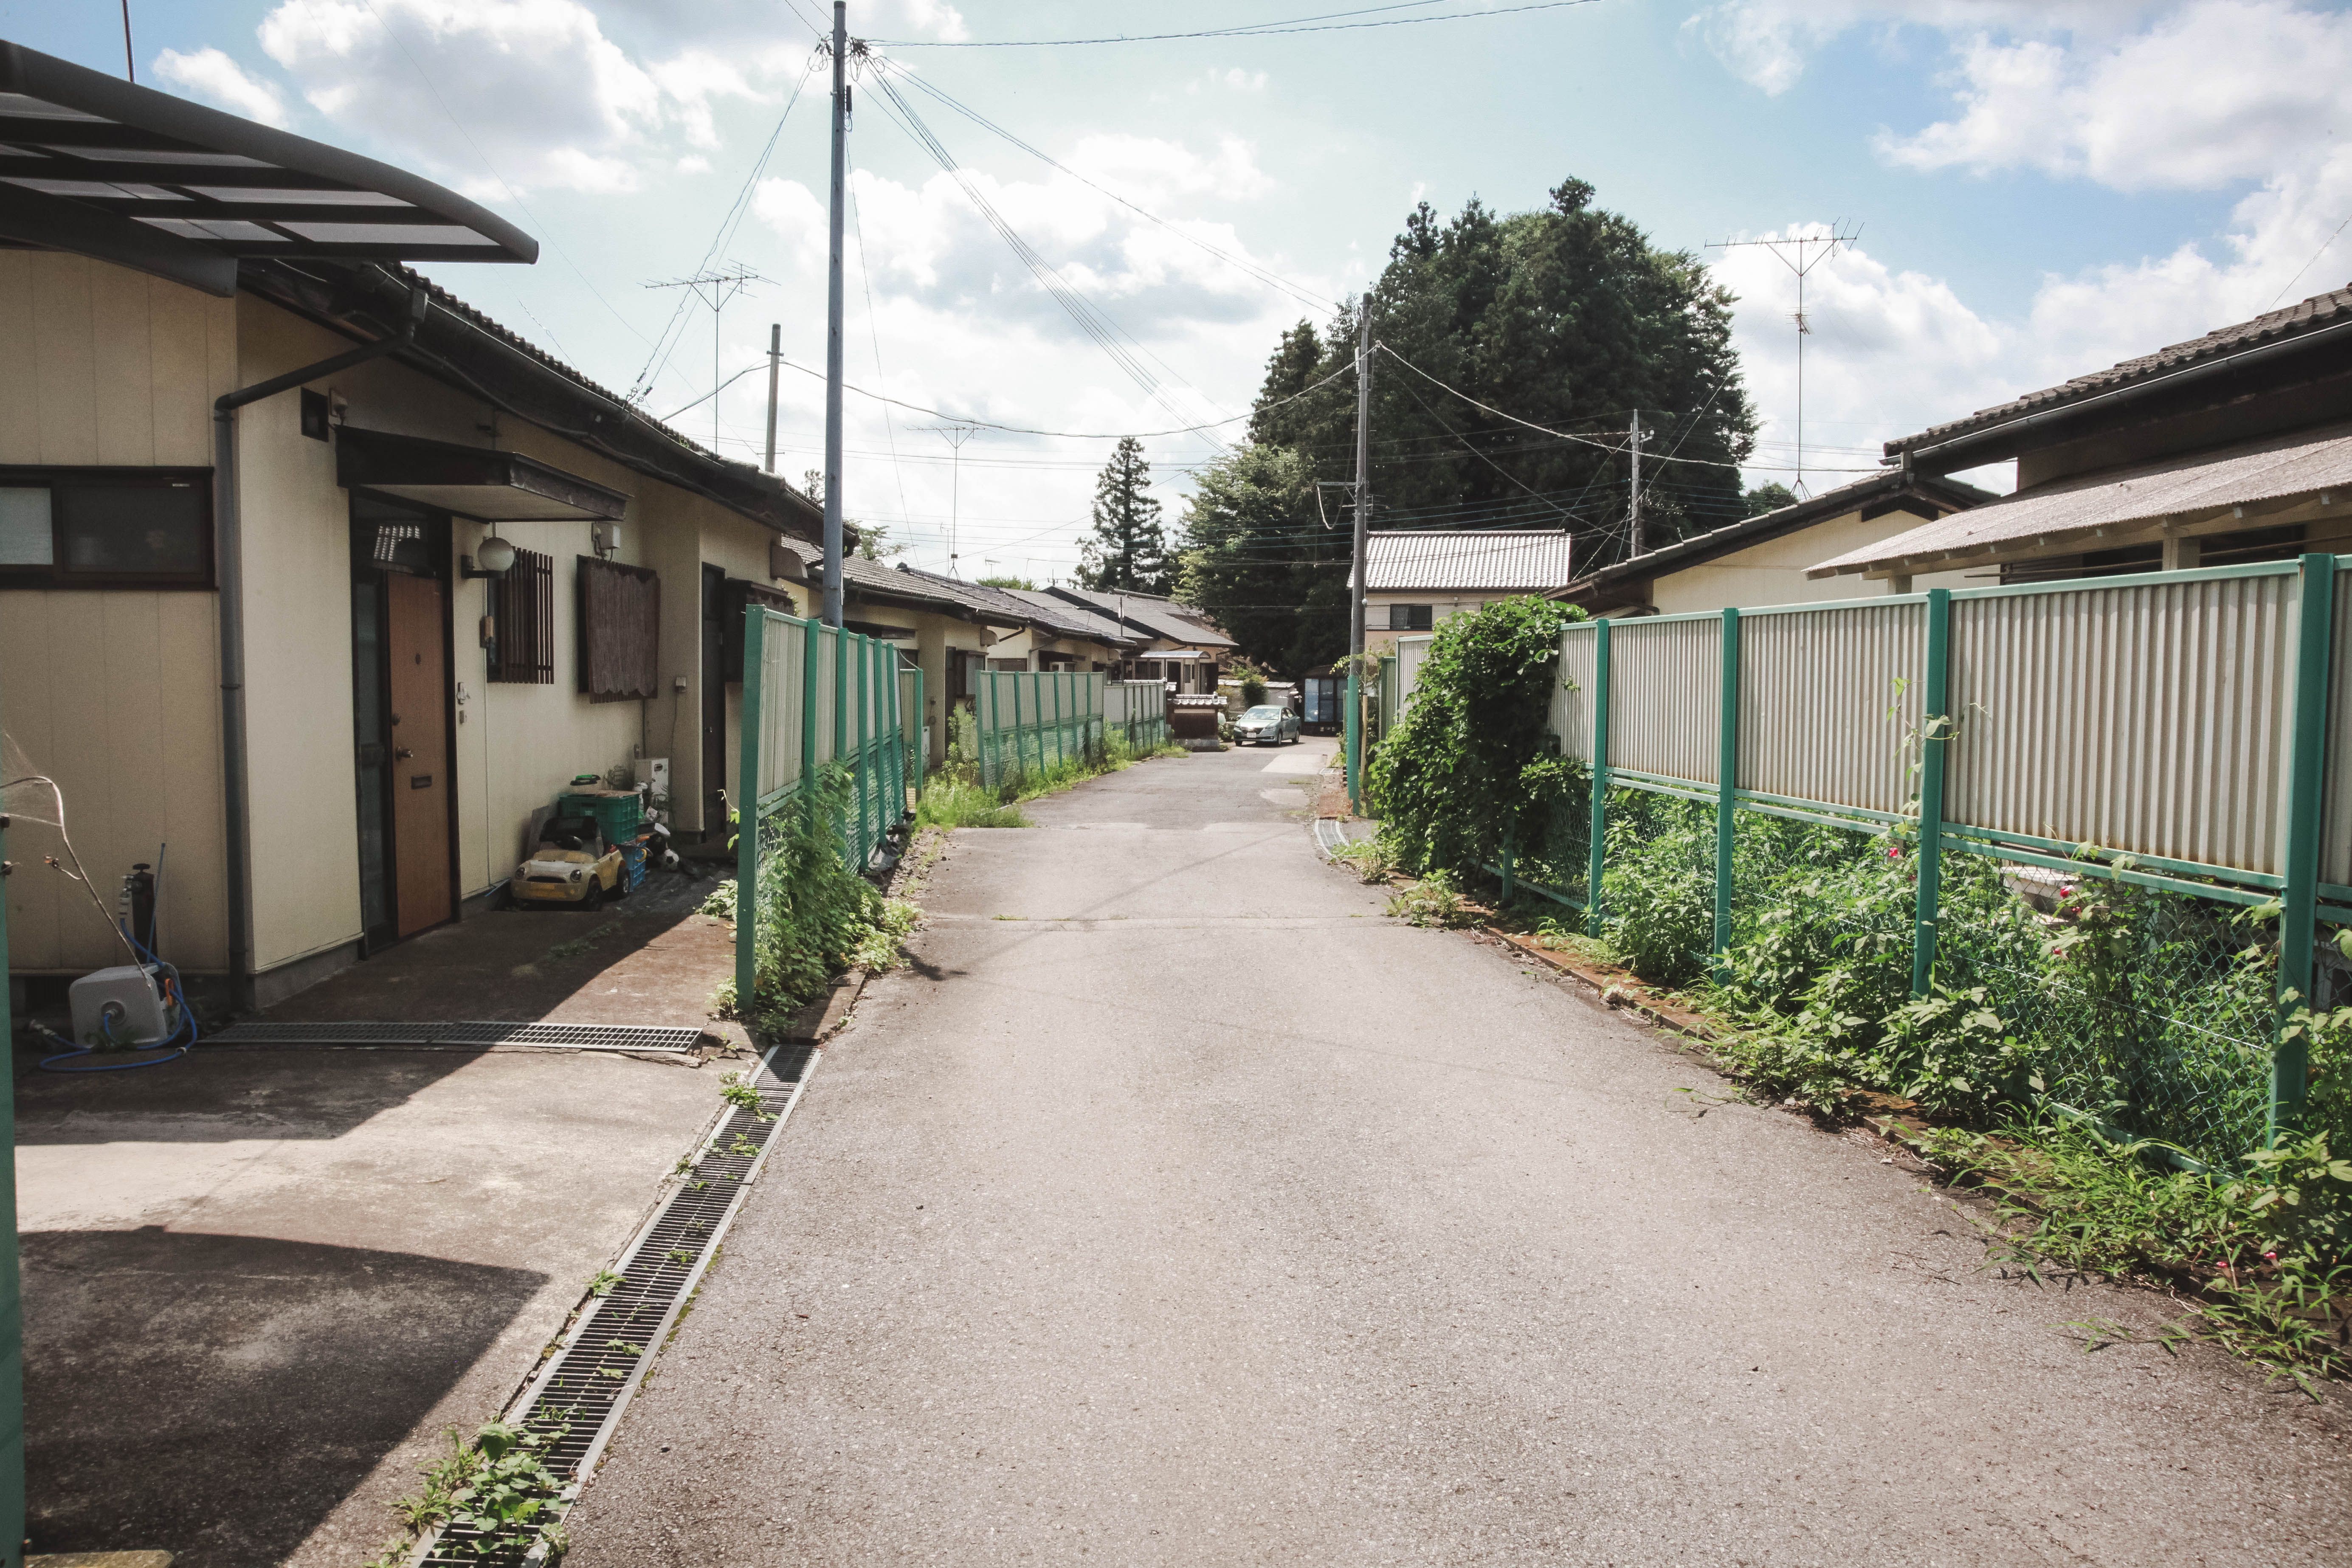 The town of Ichikai, where Mayor Masaaki Irino is working on a 10-year plan to make it the first town to become dementia-free. Image by Audrey Henson. Japan, 2019.